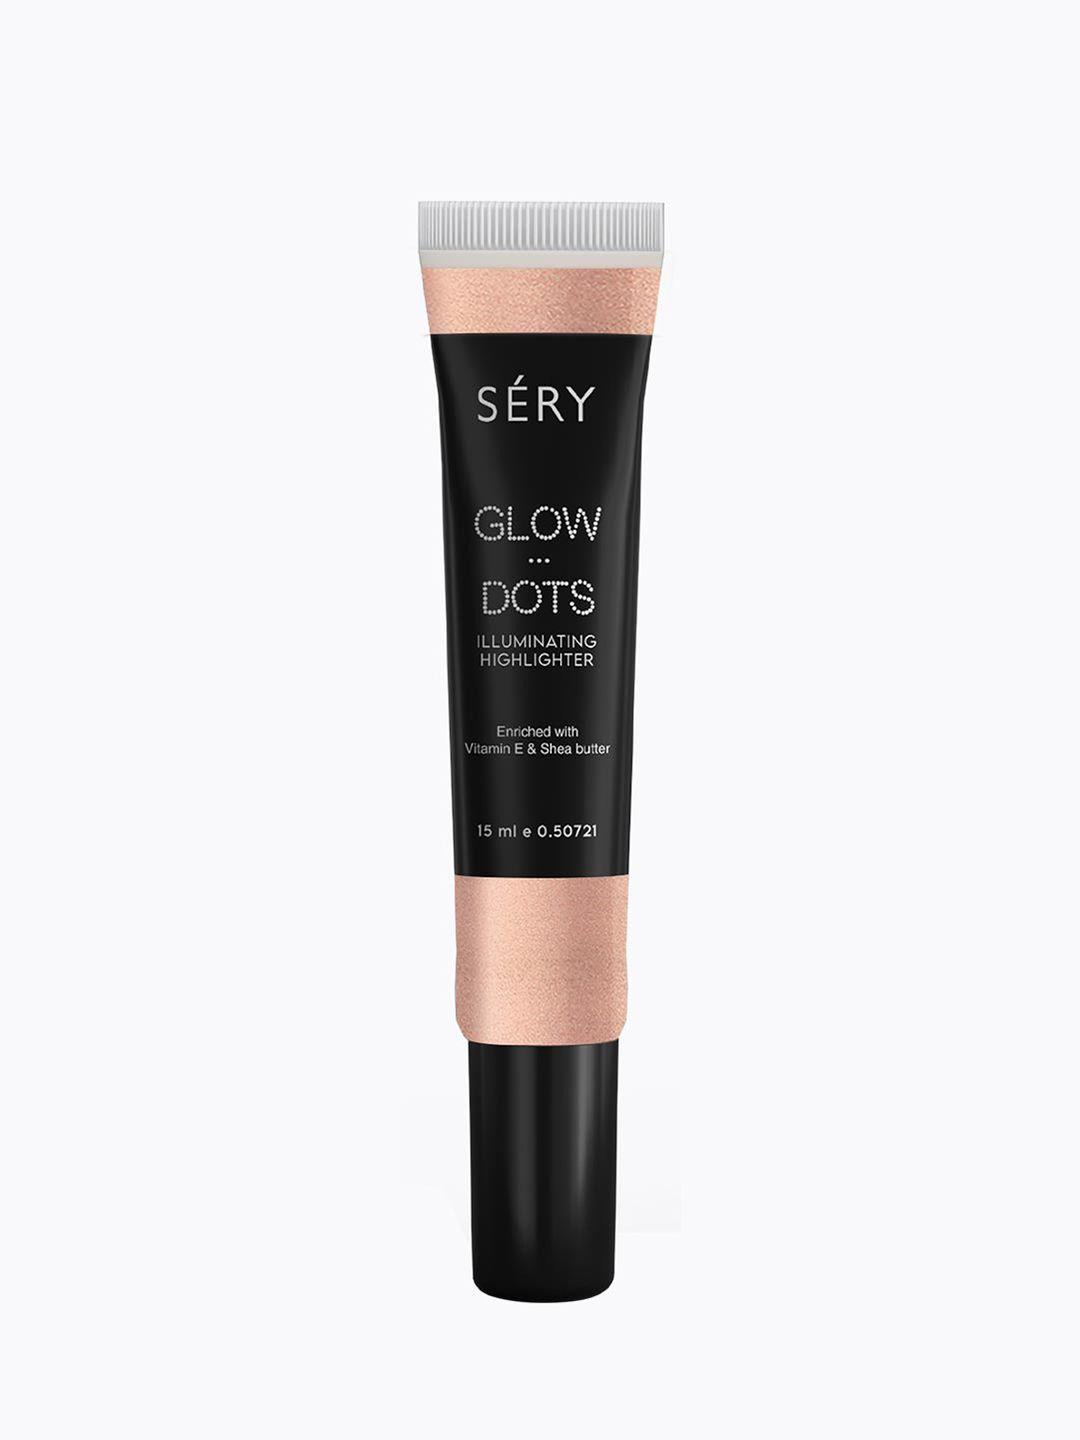 sery-glow-dots-smudge-proof-illuminating-highlighter-with-vitamin-e-15ml---rose